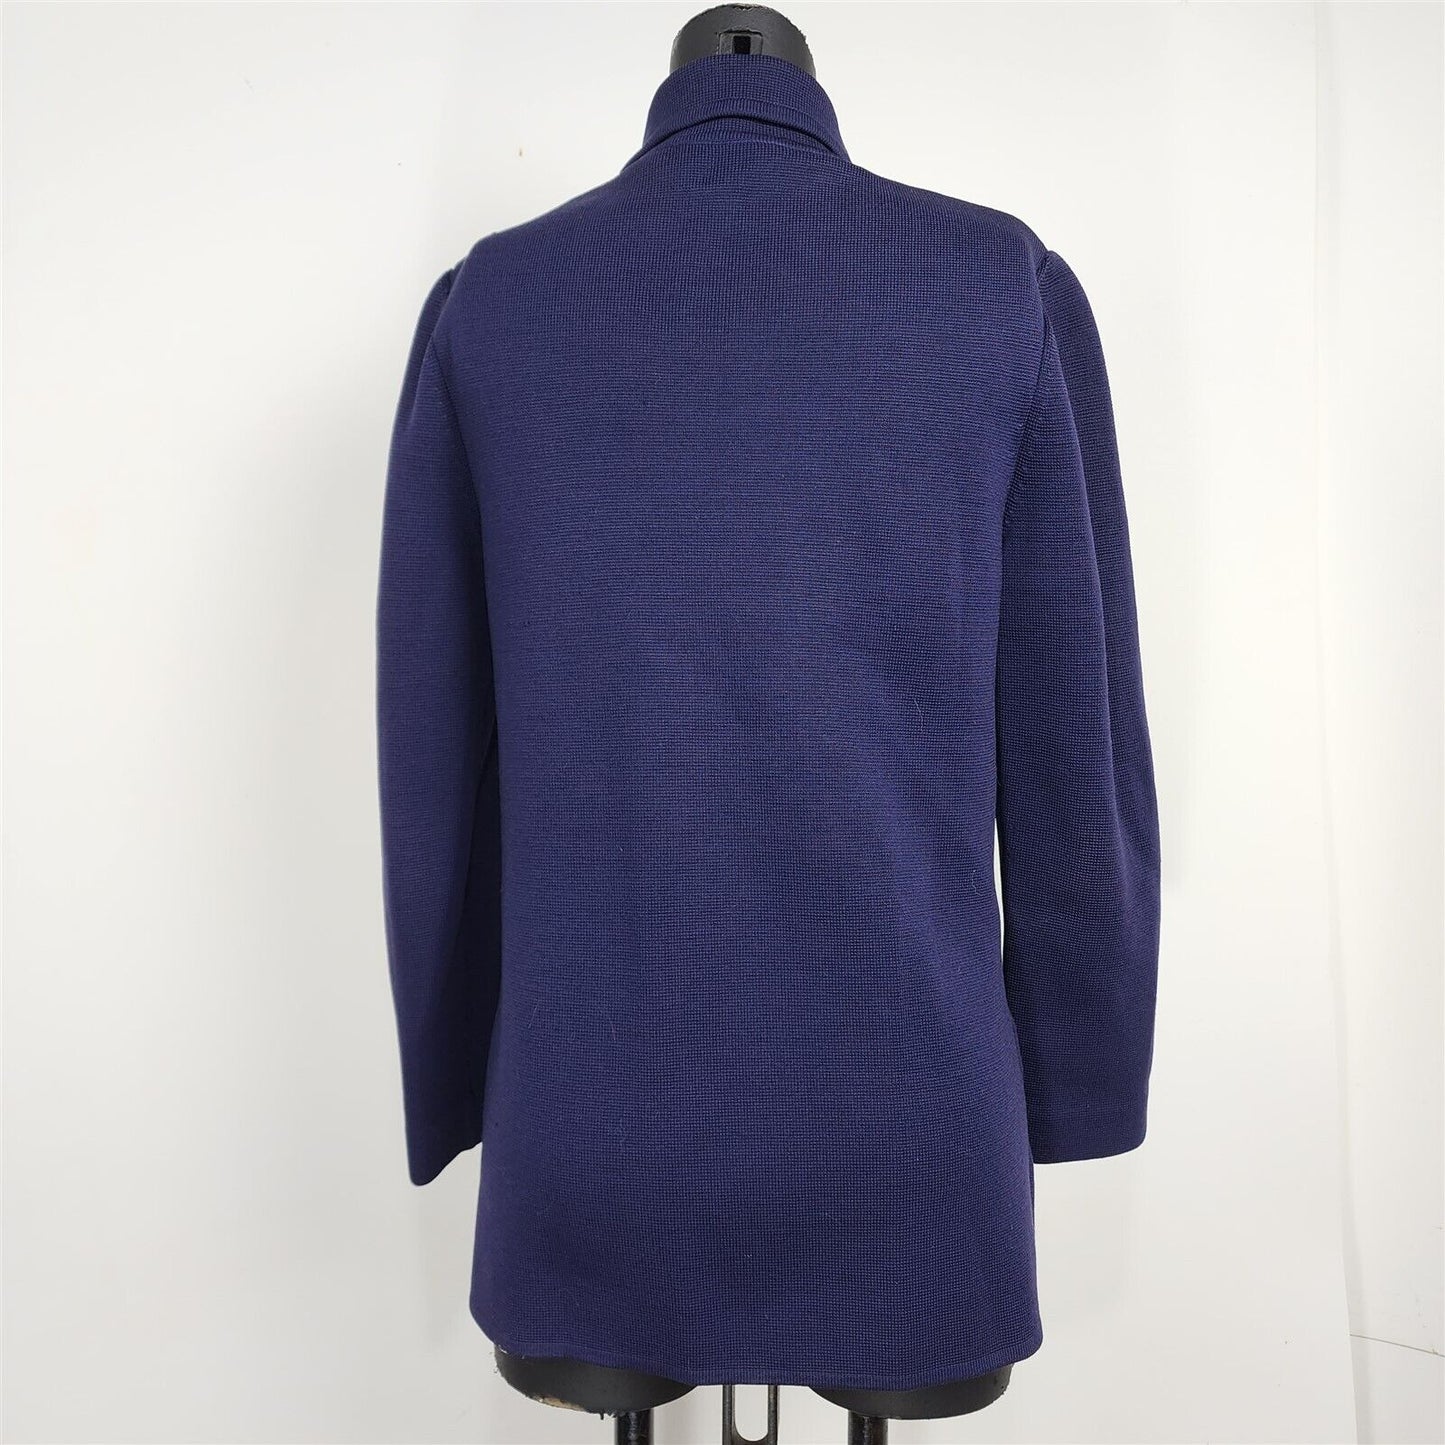 Vintage Cyn Les Navy Blue Wool Double Breasted Cardigan Sweater Size 8